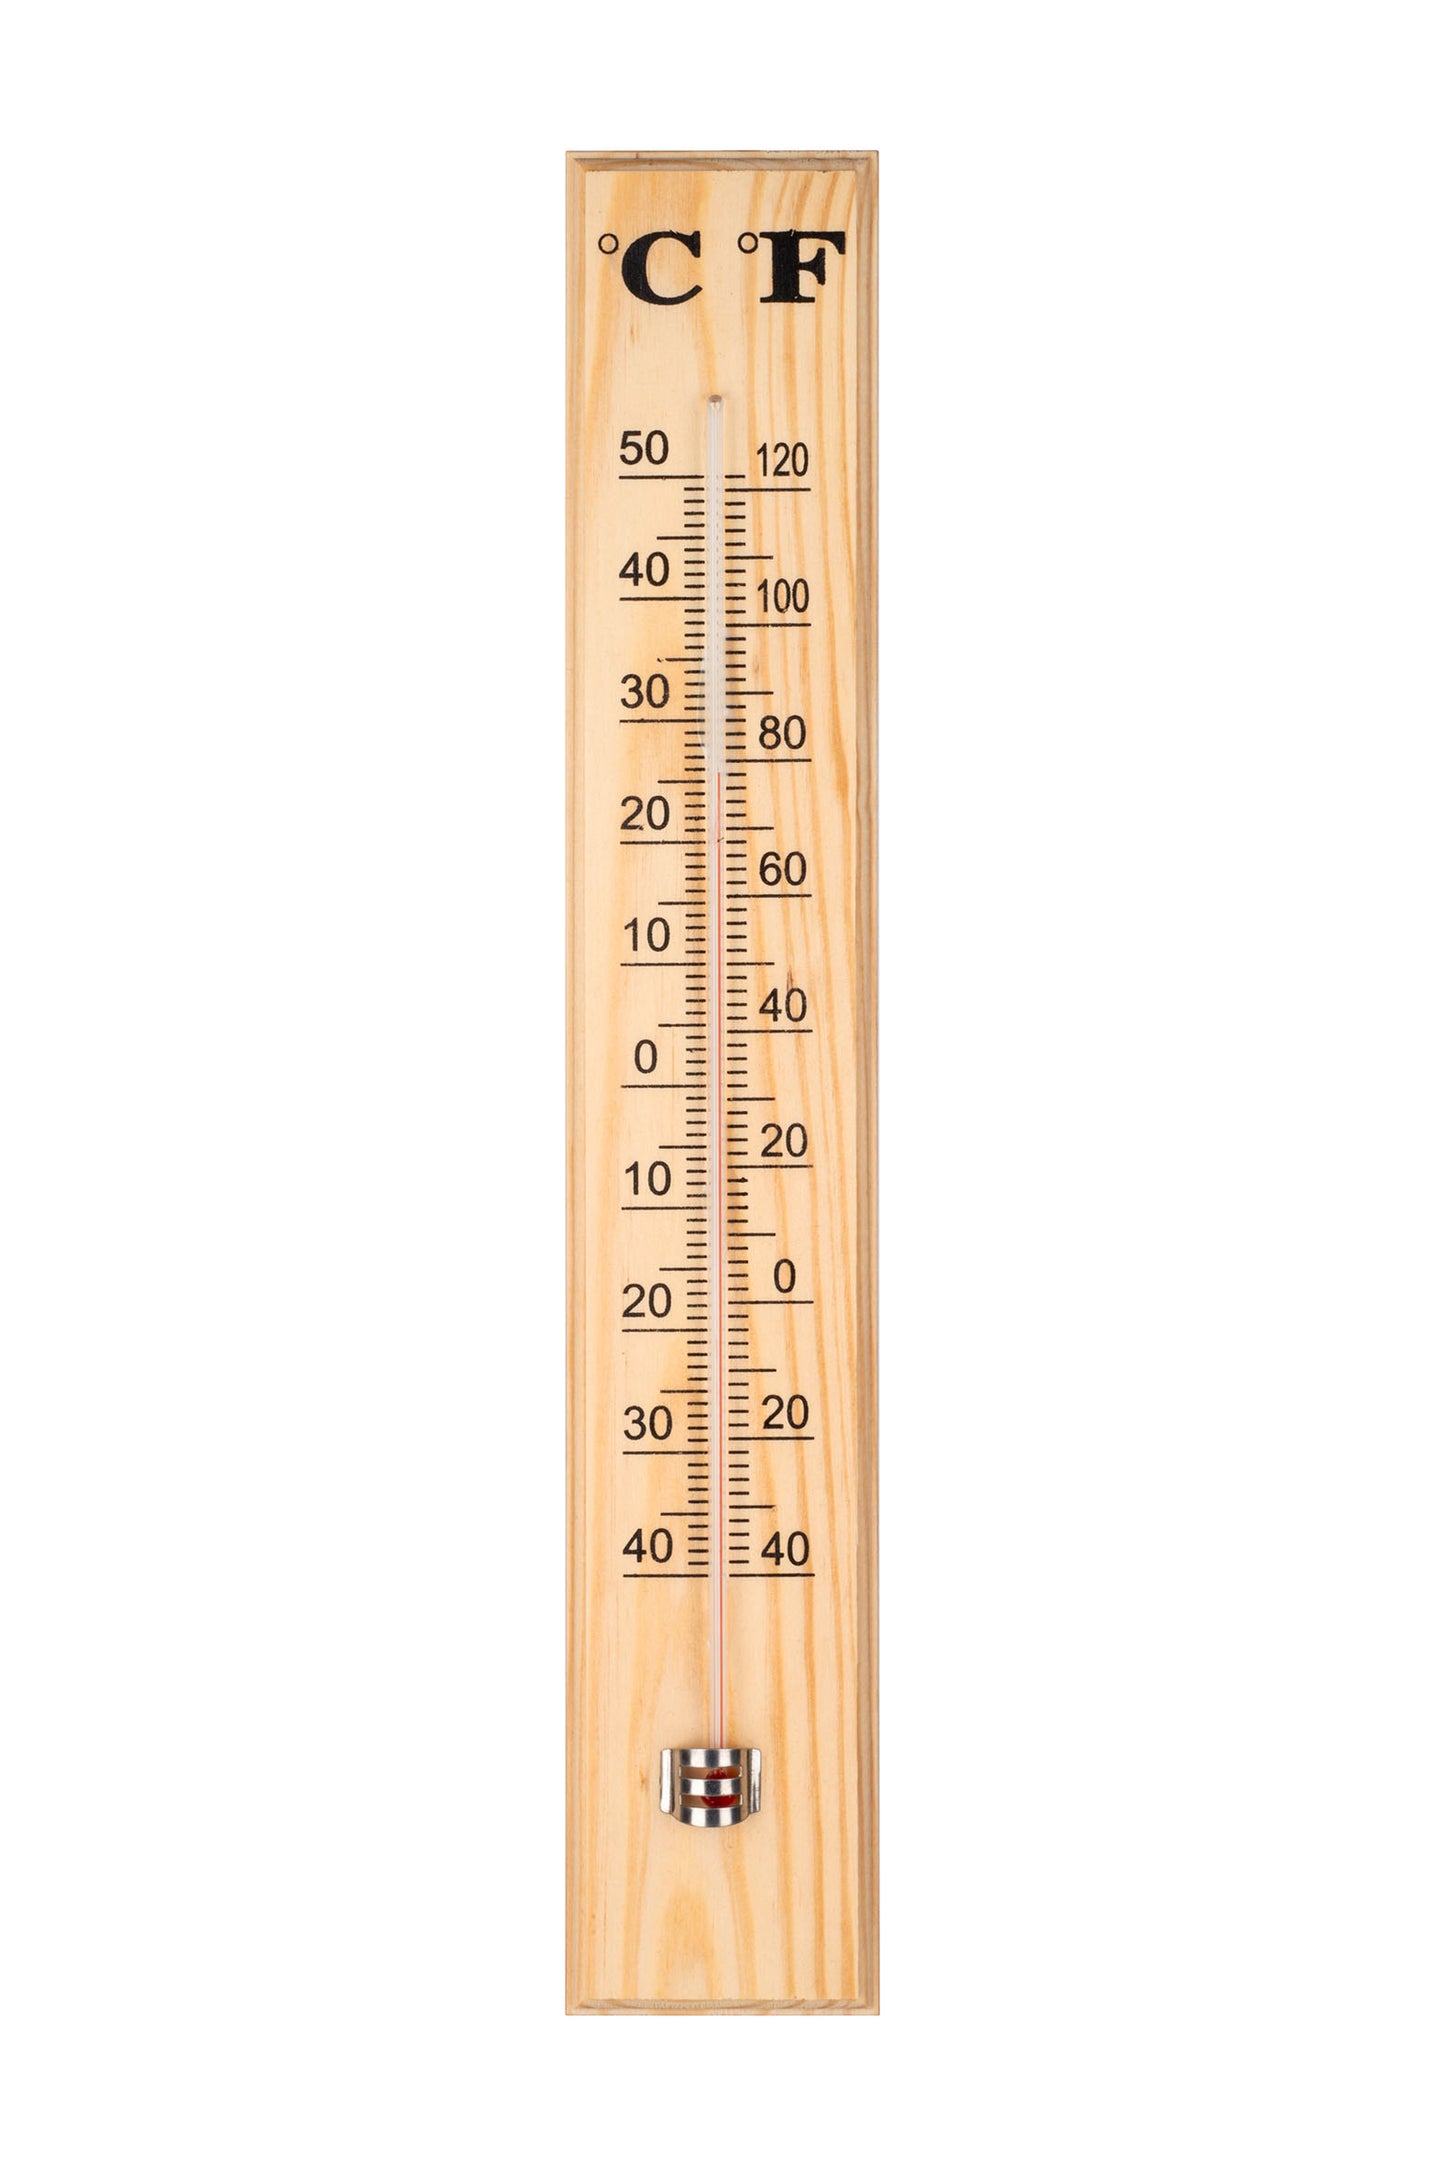 Premion - Outdoor Thermometer - Wood